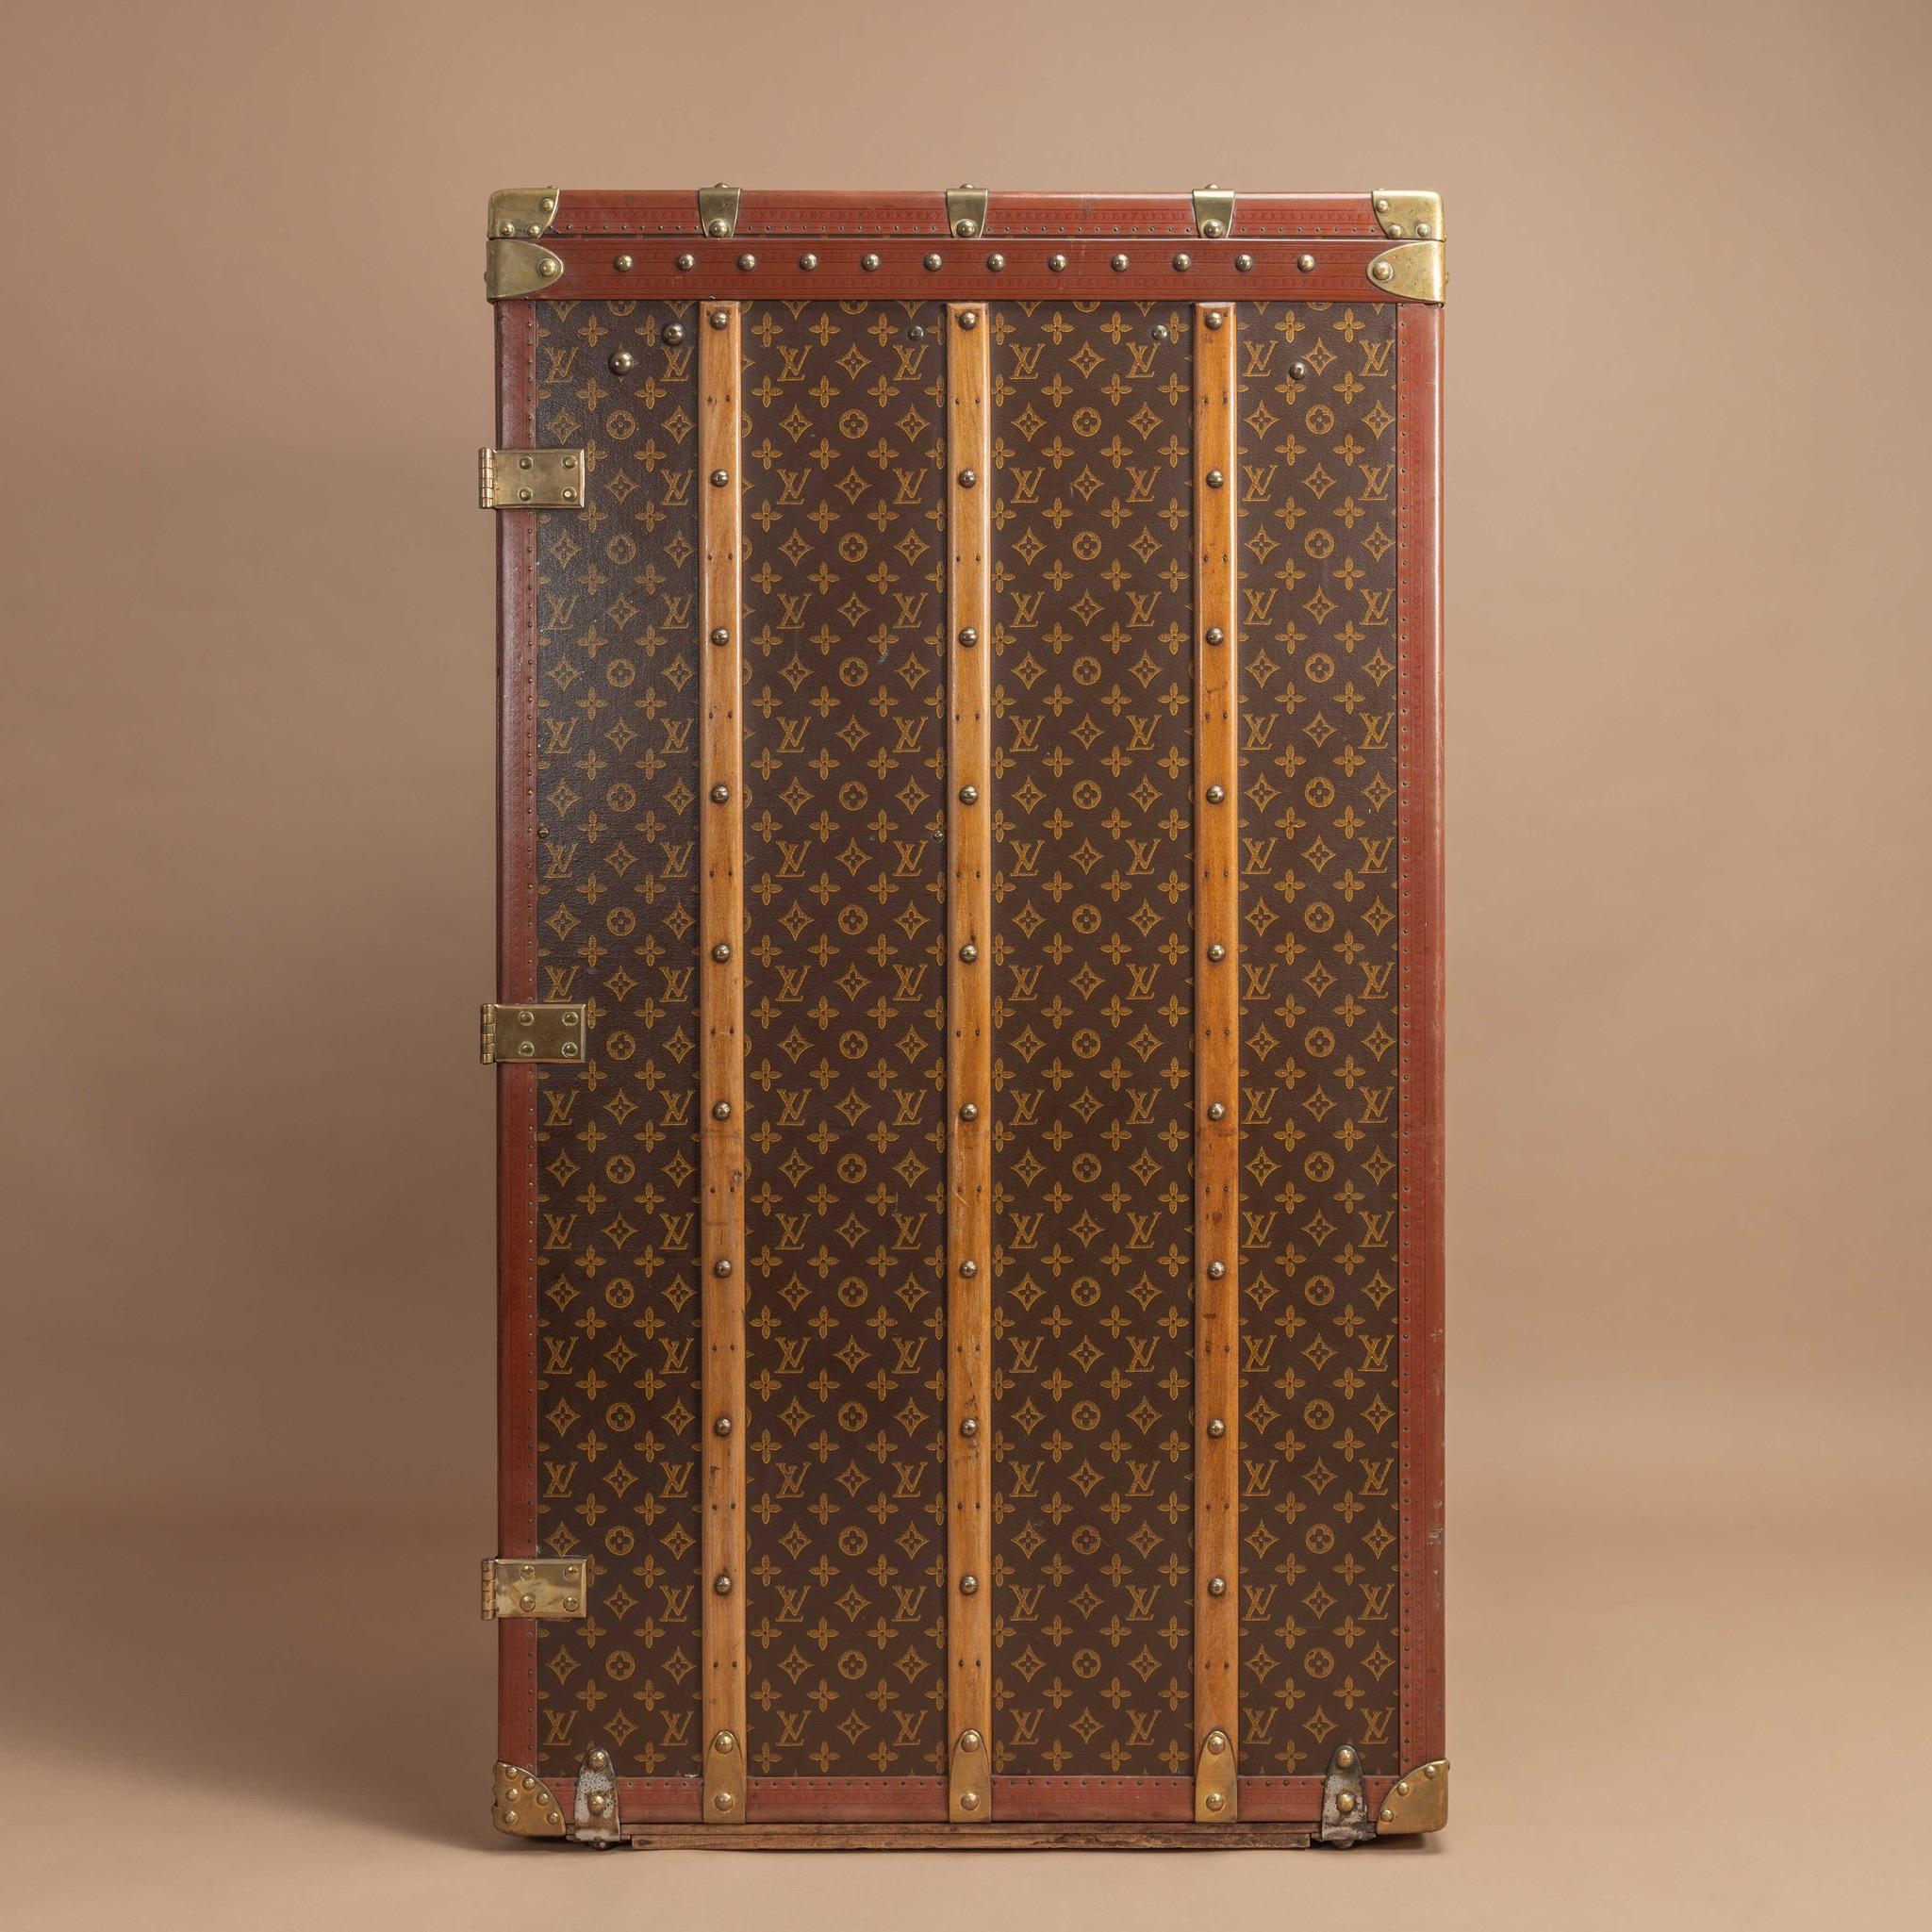 Exceptionally Large Louis Vuitton Wardrobe Trunk, circa 1955 In Good Condition For Sale In London, GB